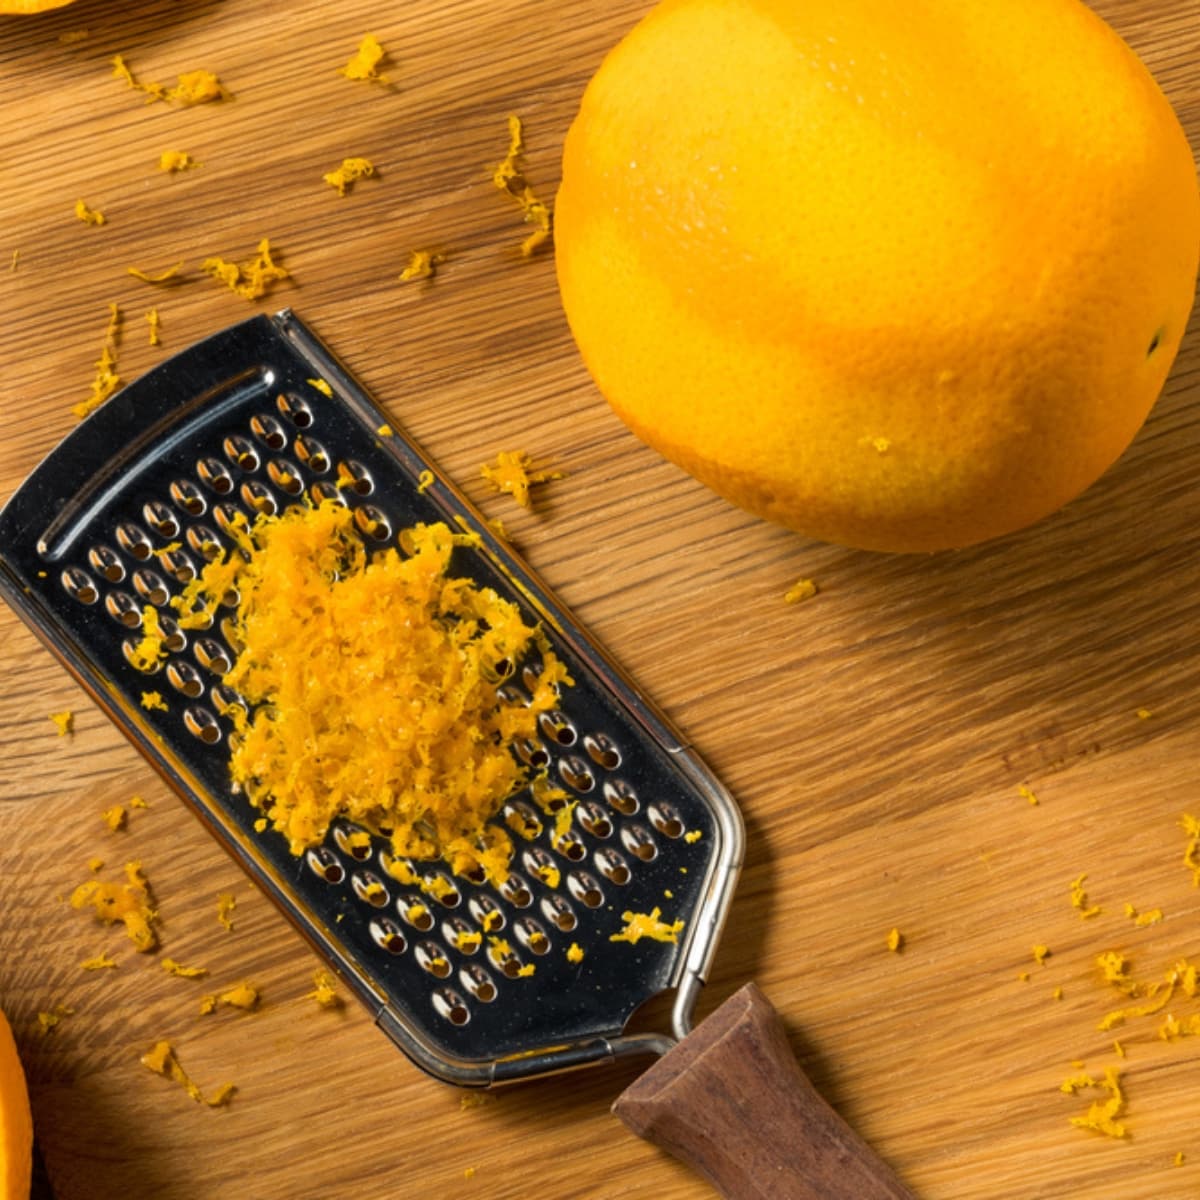 30 Easy Orange Recipes (Sweet and Savory) featuring Zested, Whole Orange on Wooden Table with Microplane Rasp with Orange Zest